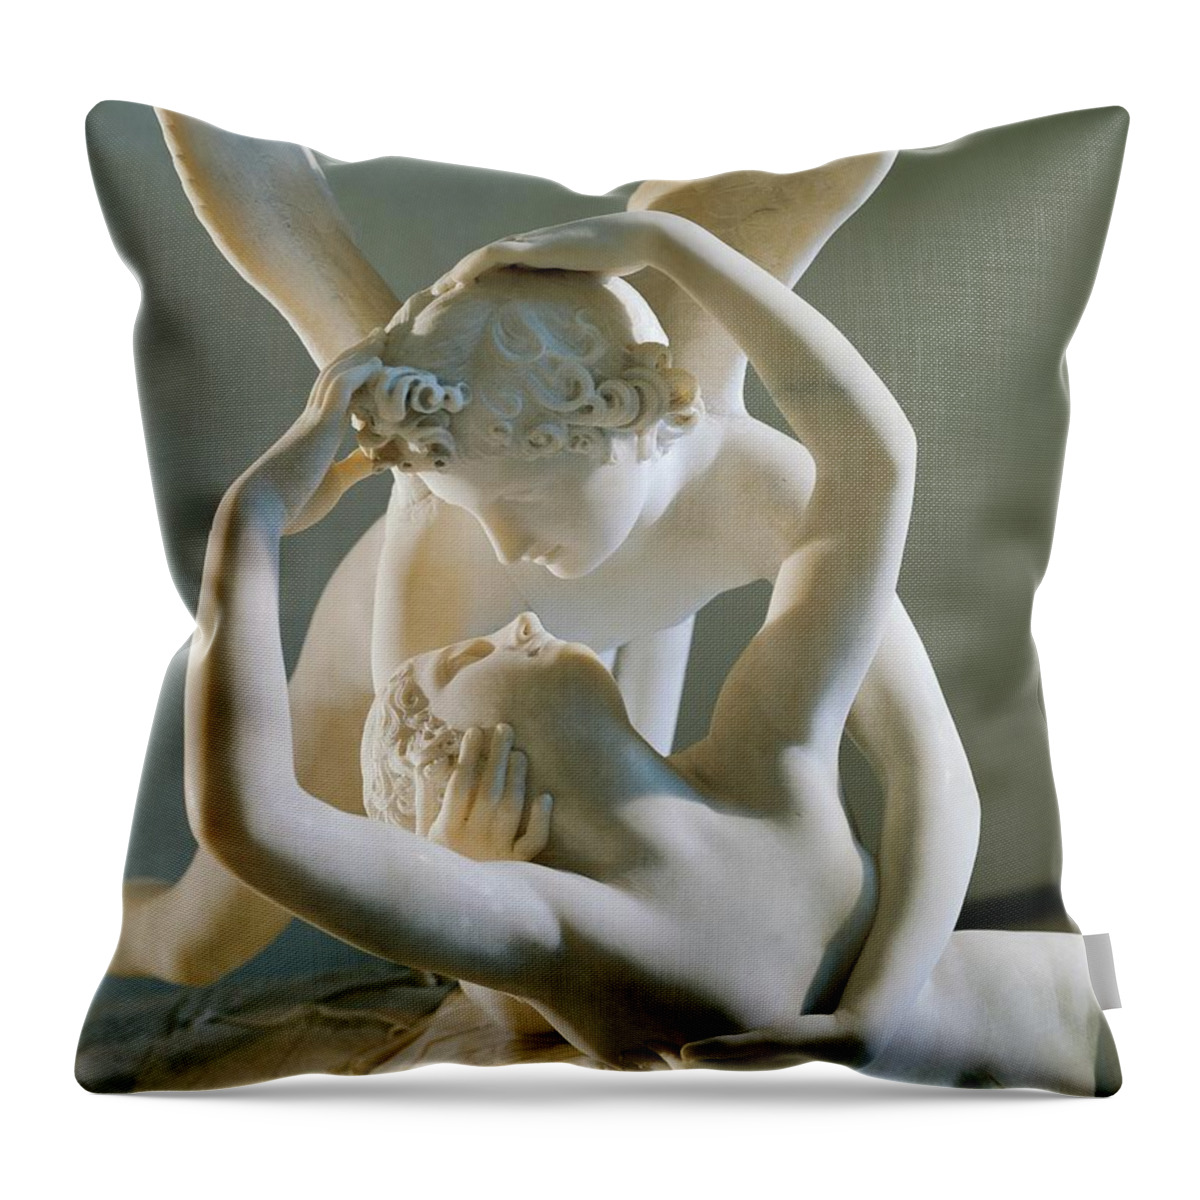 Cupid Throw Pillow featuring the photograph Cupid And Psyche By Antonio Canova, Marble by Antonio Canova